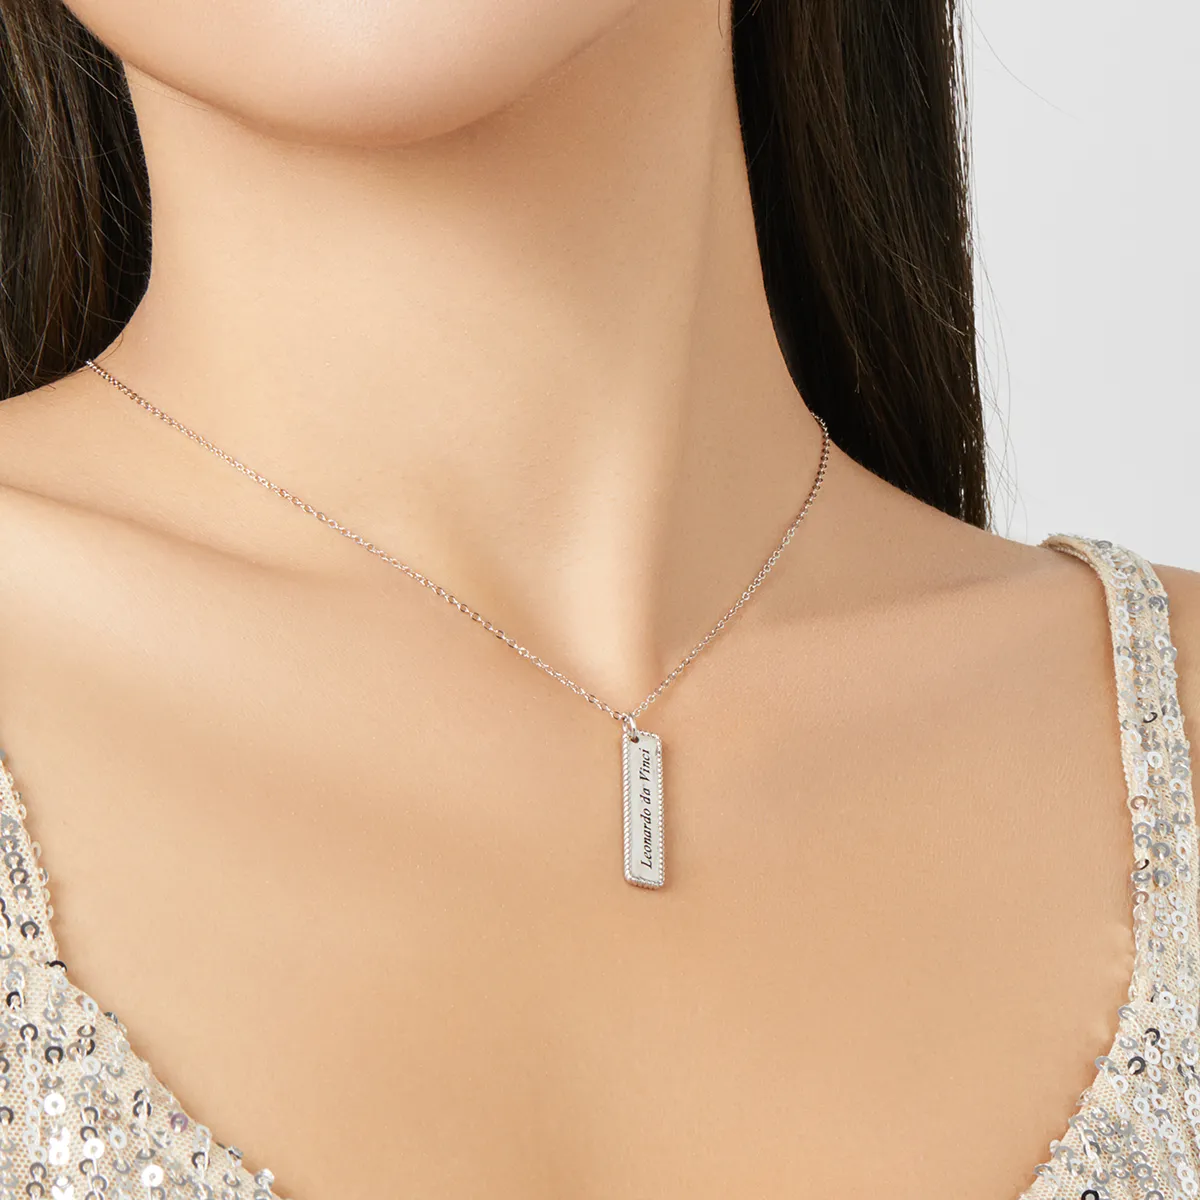 Pandora Style Life well spent is long Necklace - BSN167